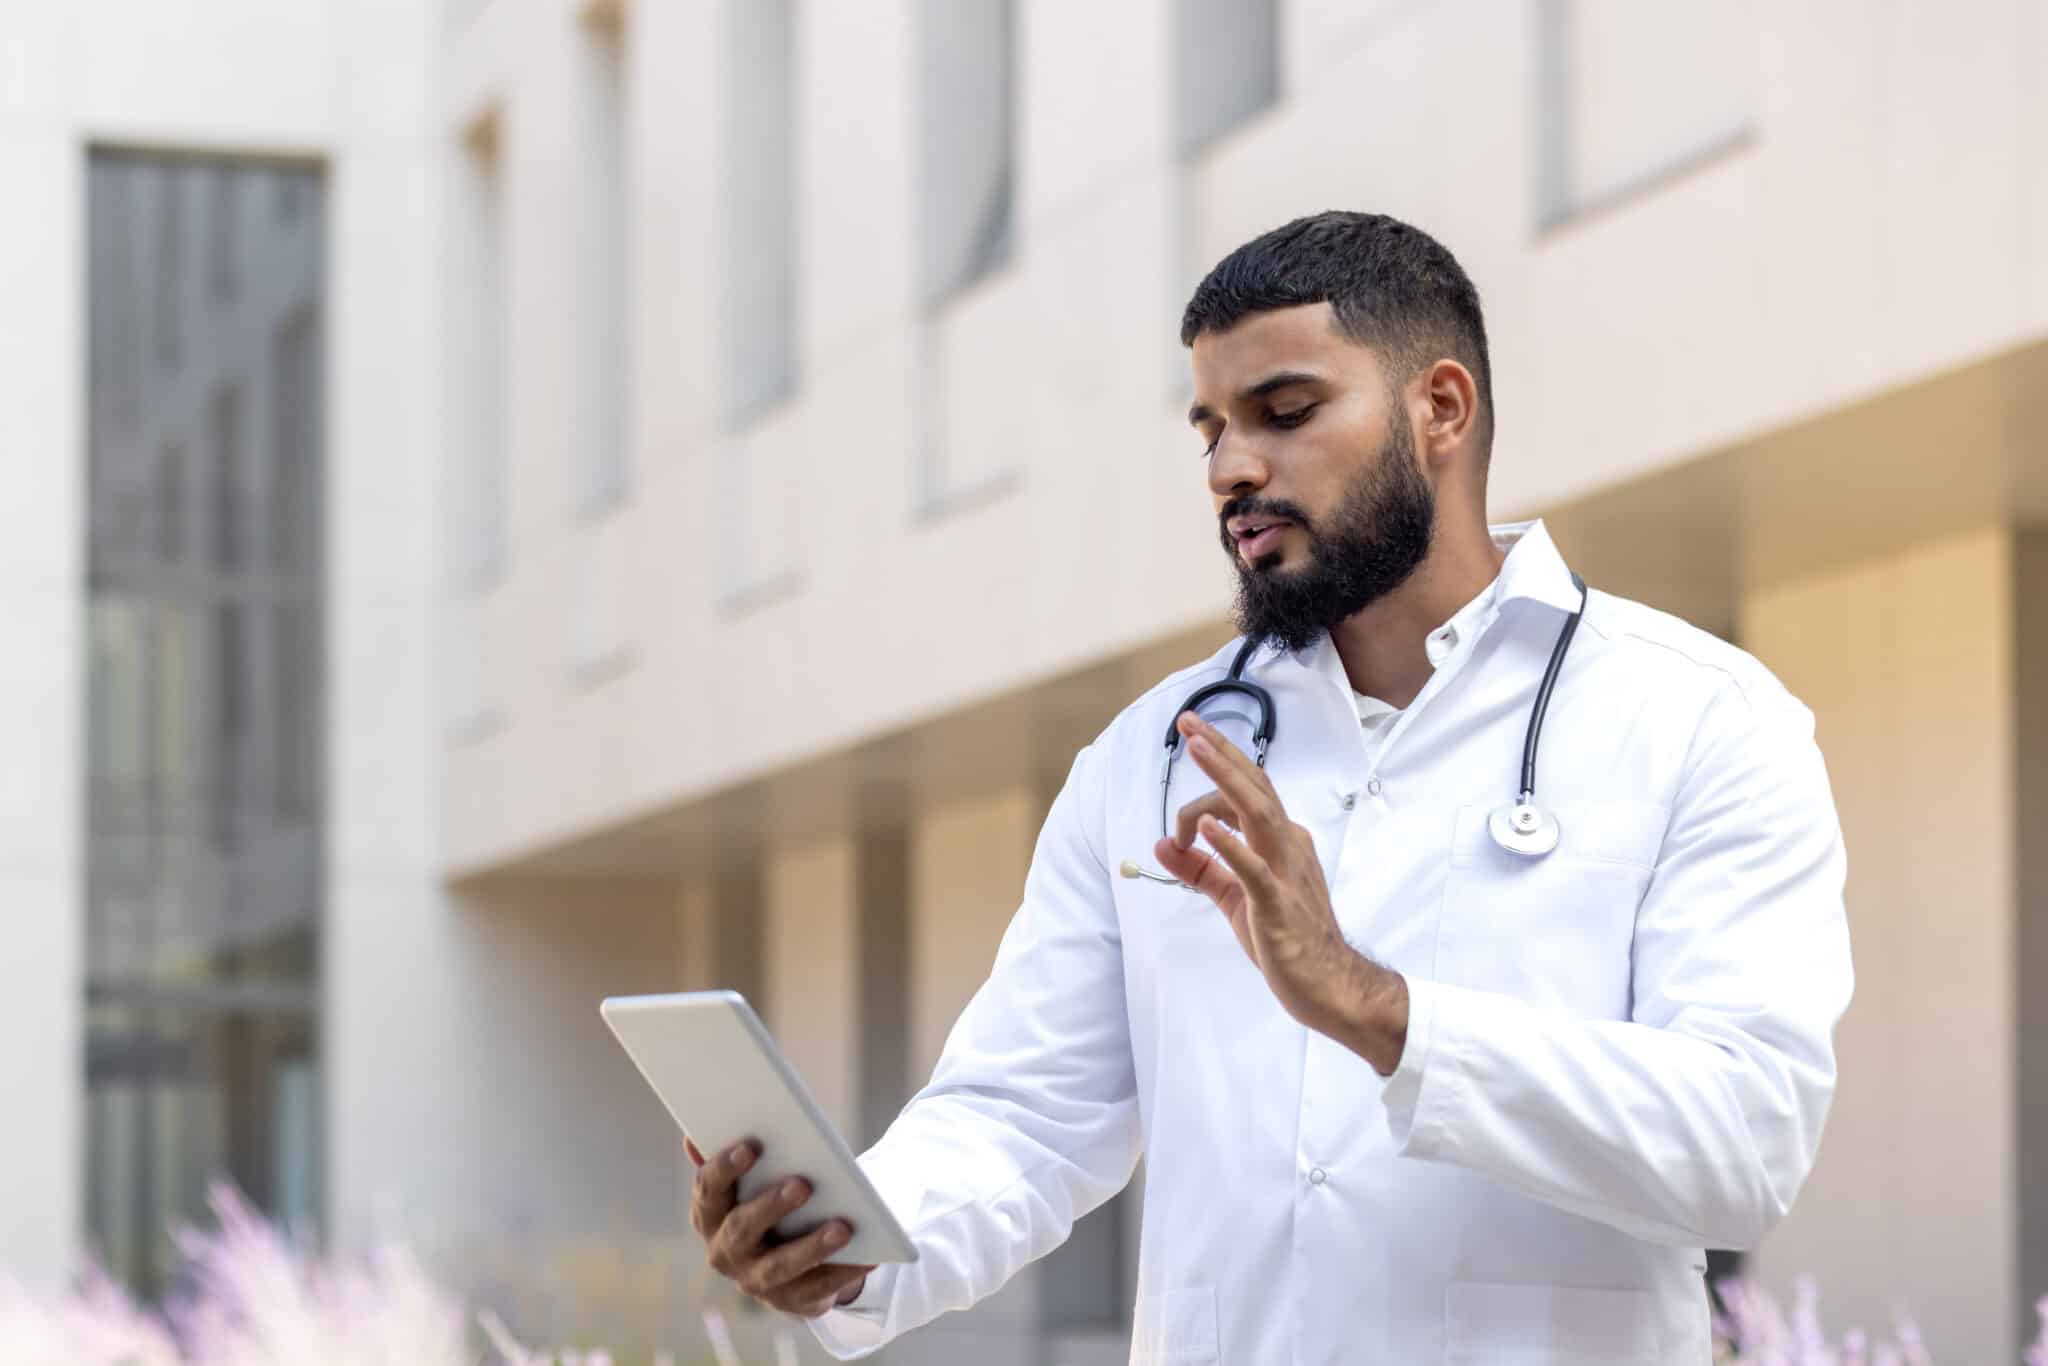 Physician in white coat dictating medical note via tablet, leveraging medical transcription services.